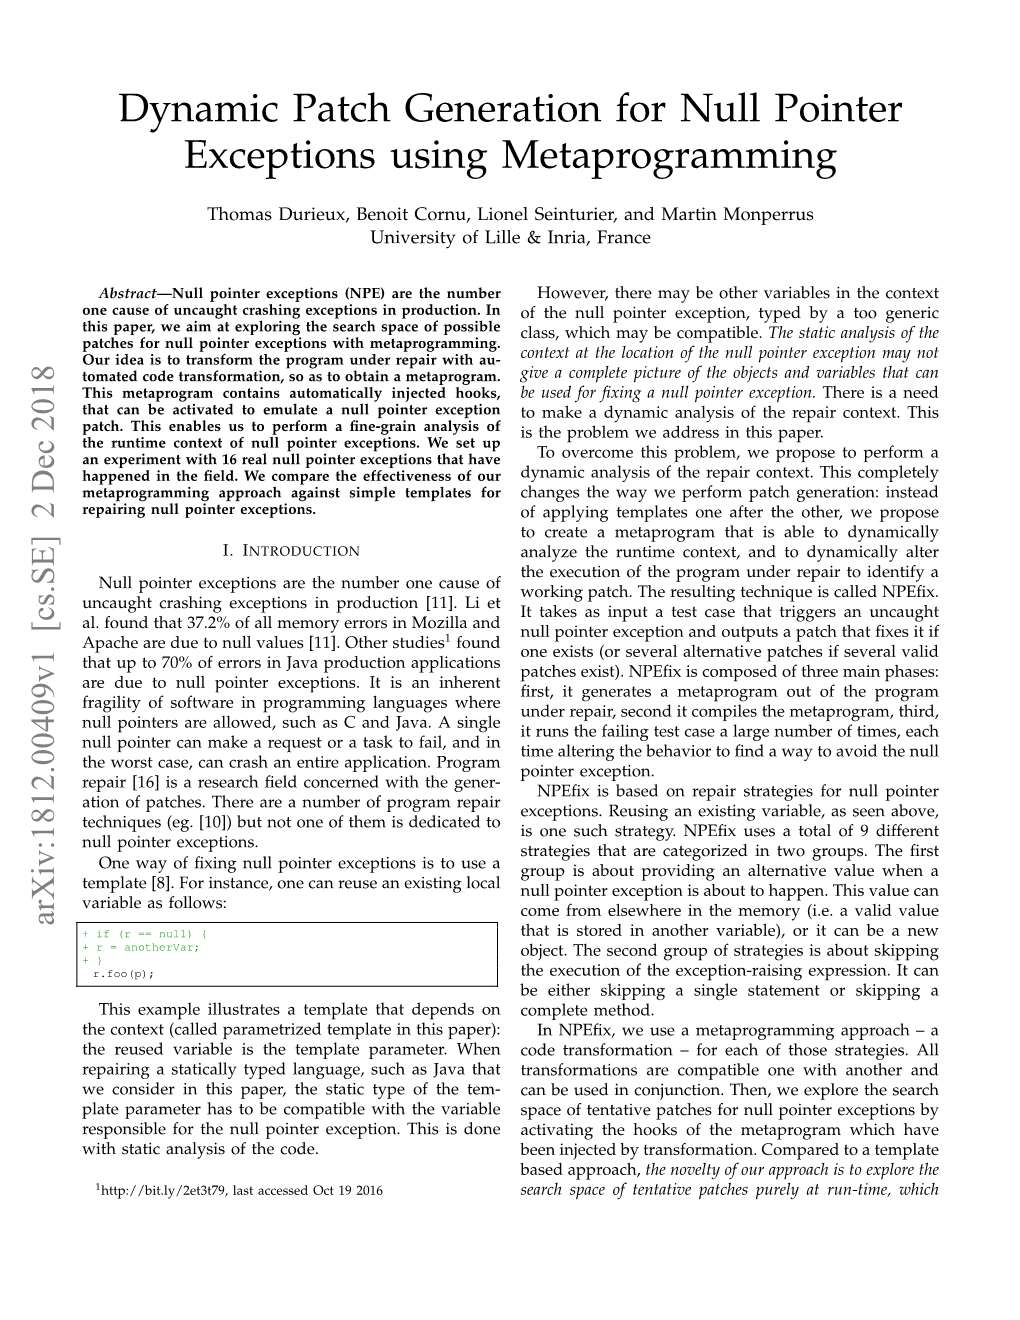 Dynamic Patch Generation for Null Pointer Exceptions Using Metaprogramming